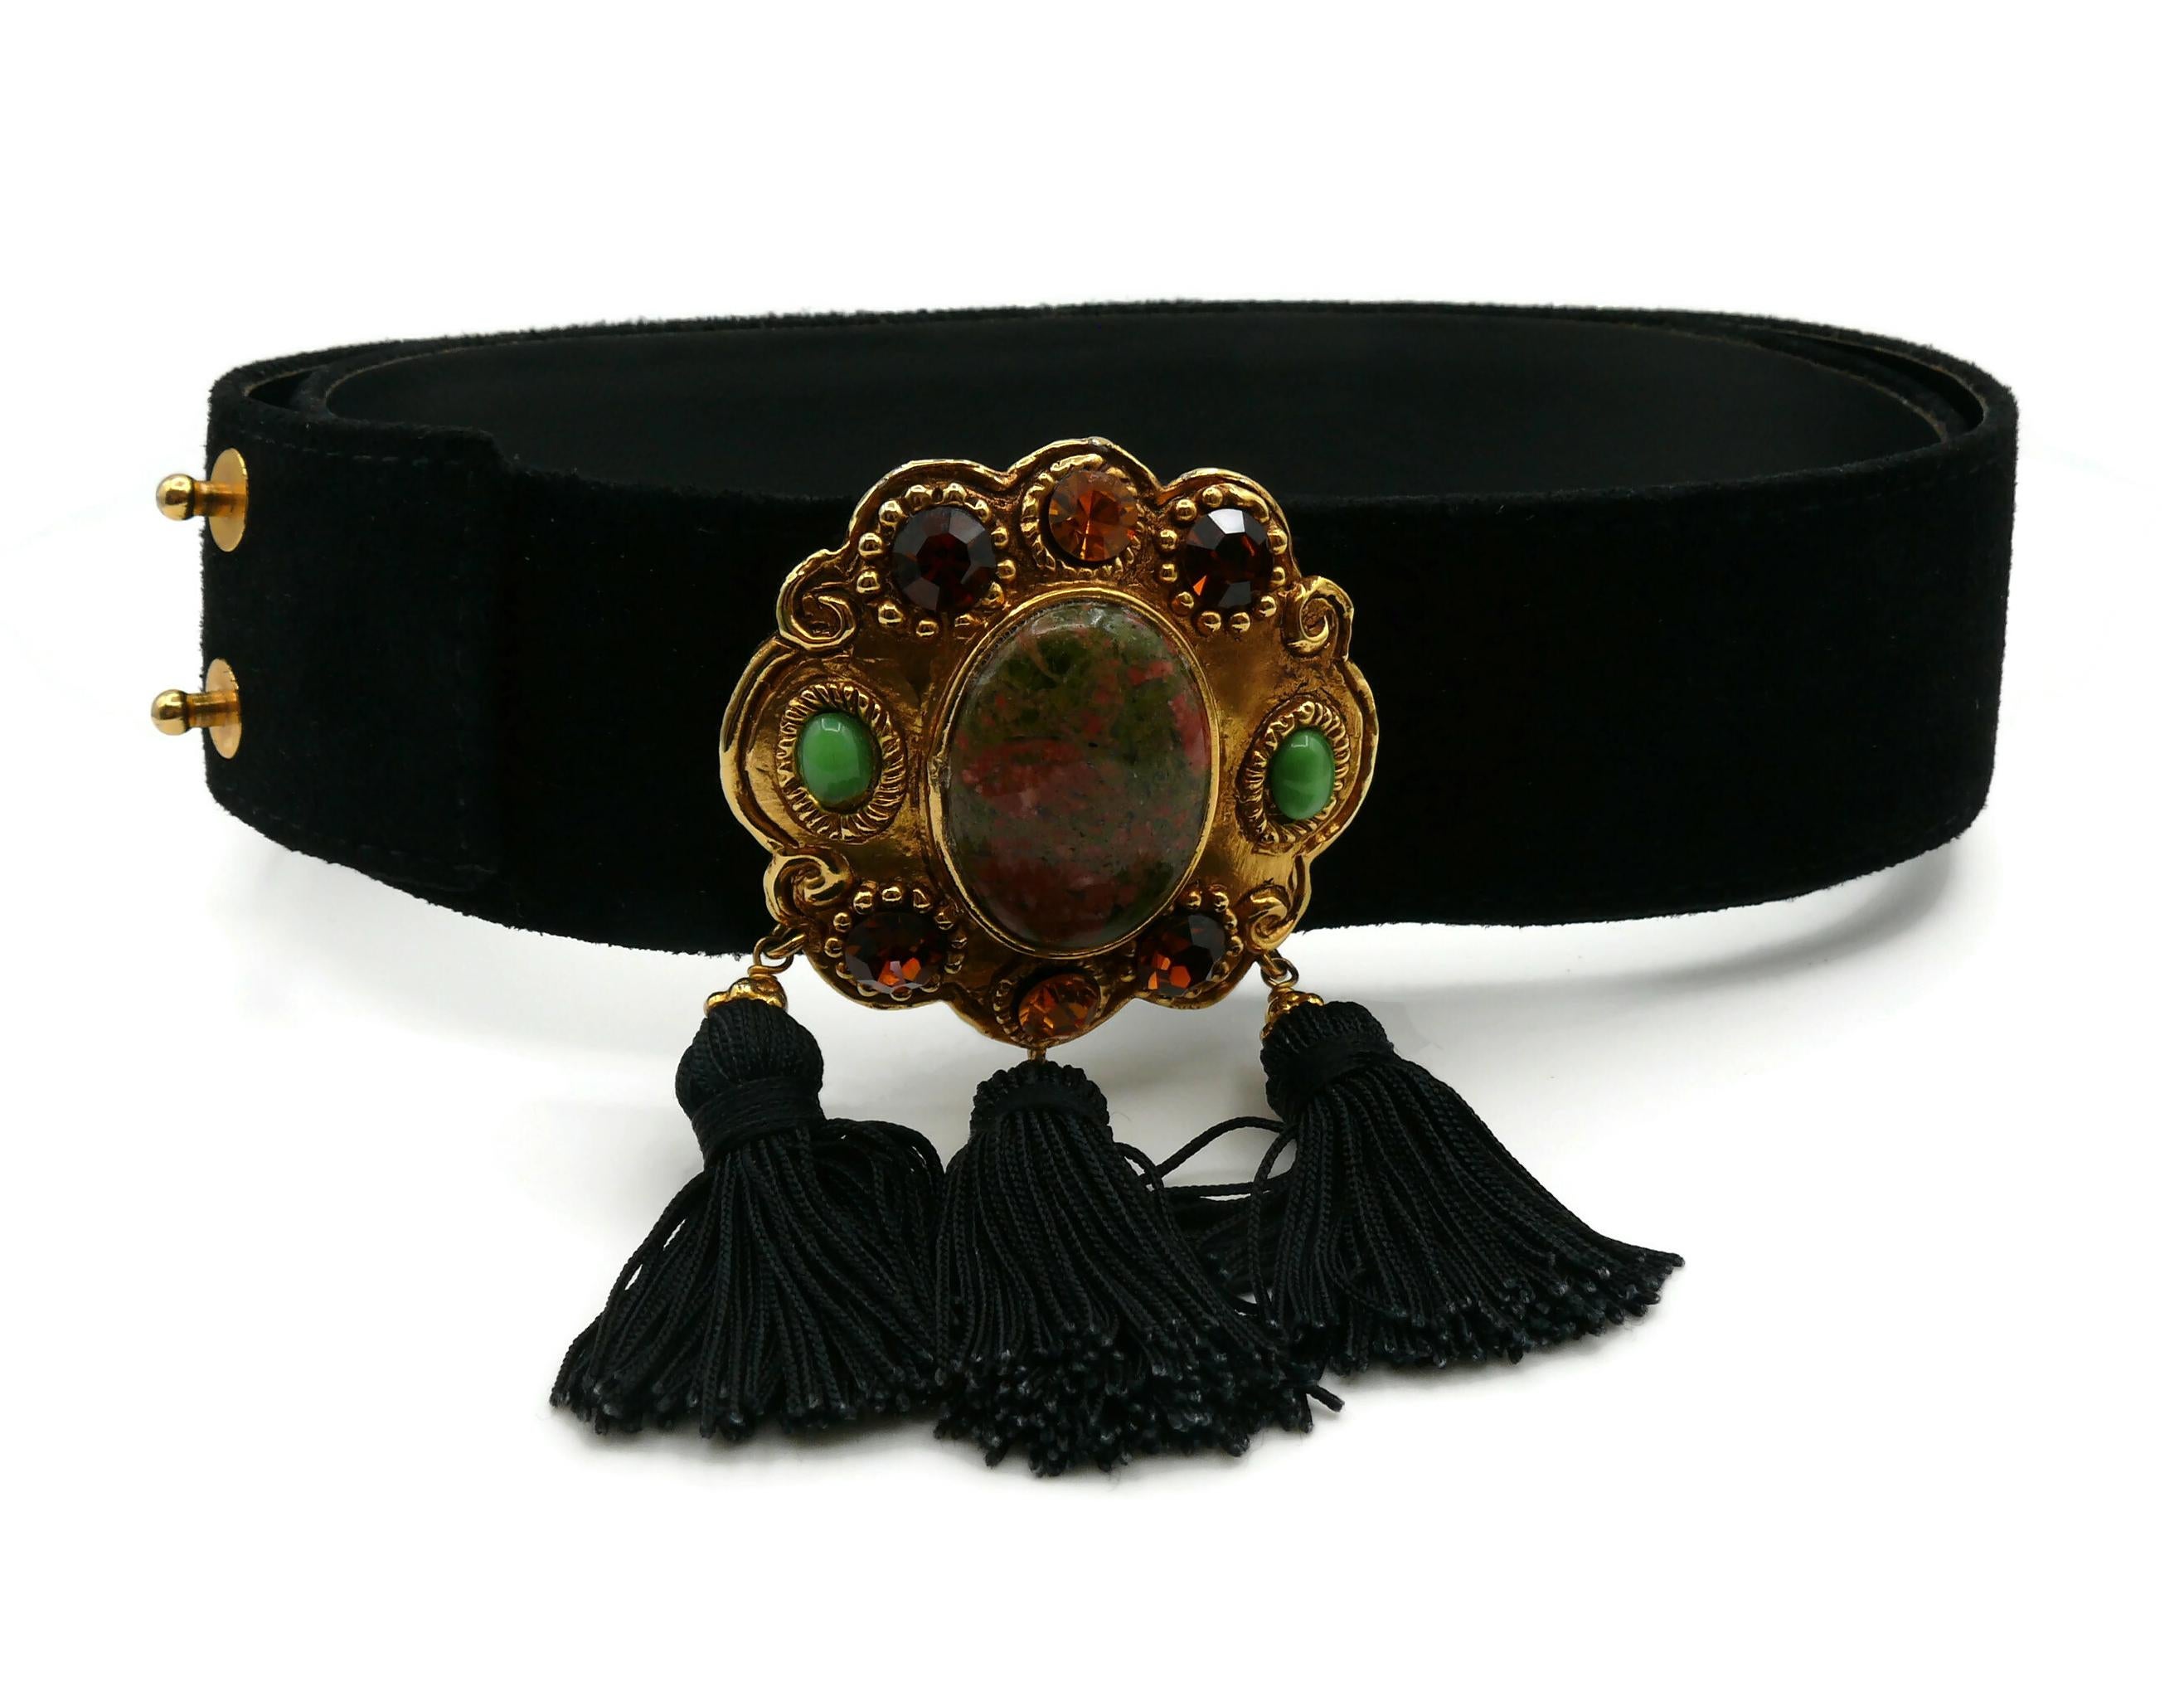 CHRISTIAN LACROIX vintage black suede leather belt featuring an antiqued gold tone medallion embellished with multicolored crystals, green glass beads, a large marbled faux stone at the center and three black tassels.

Marked CHRISTIAN LACROIX